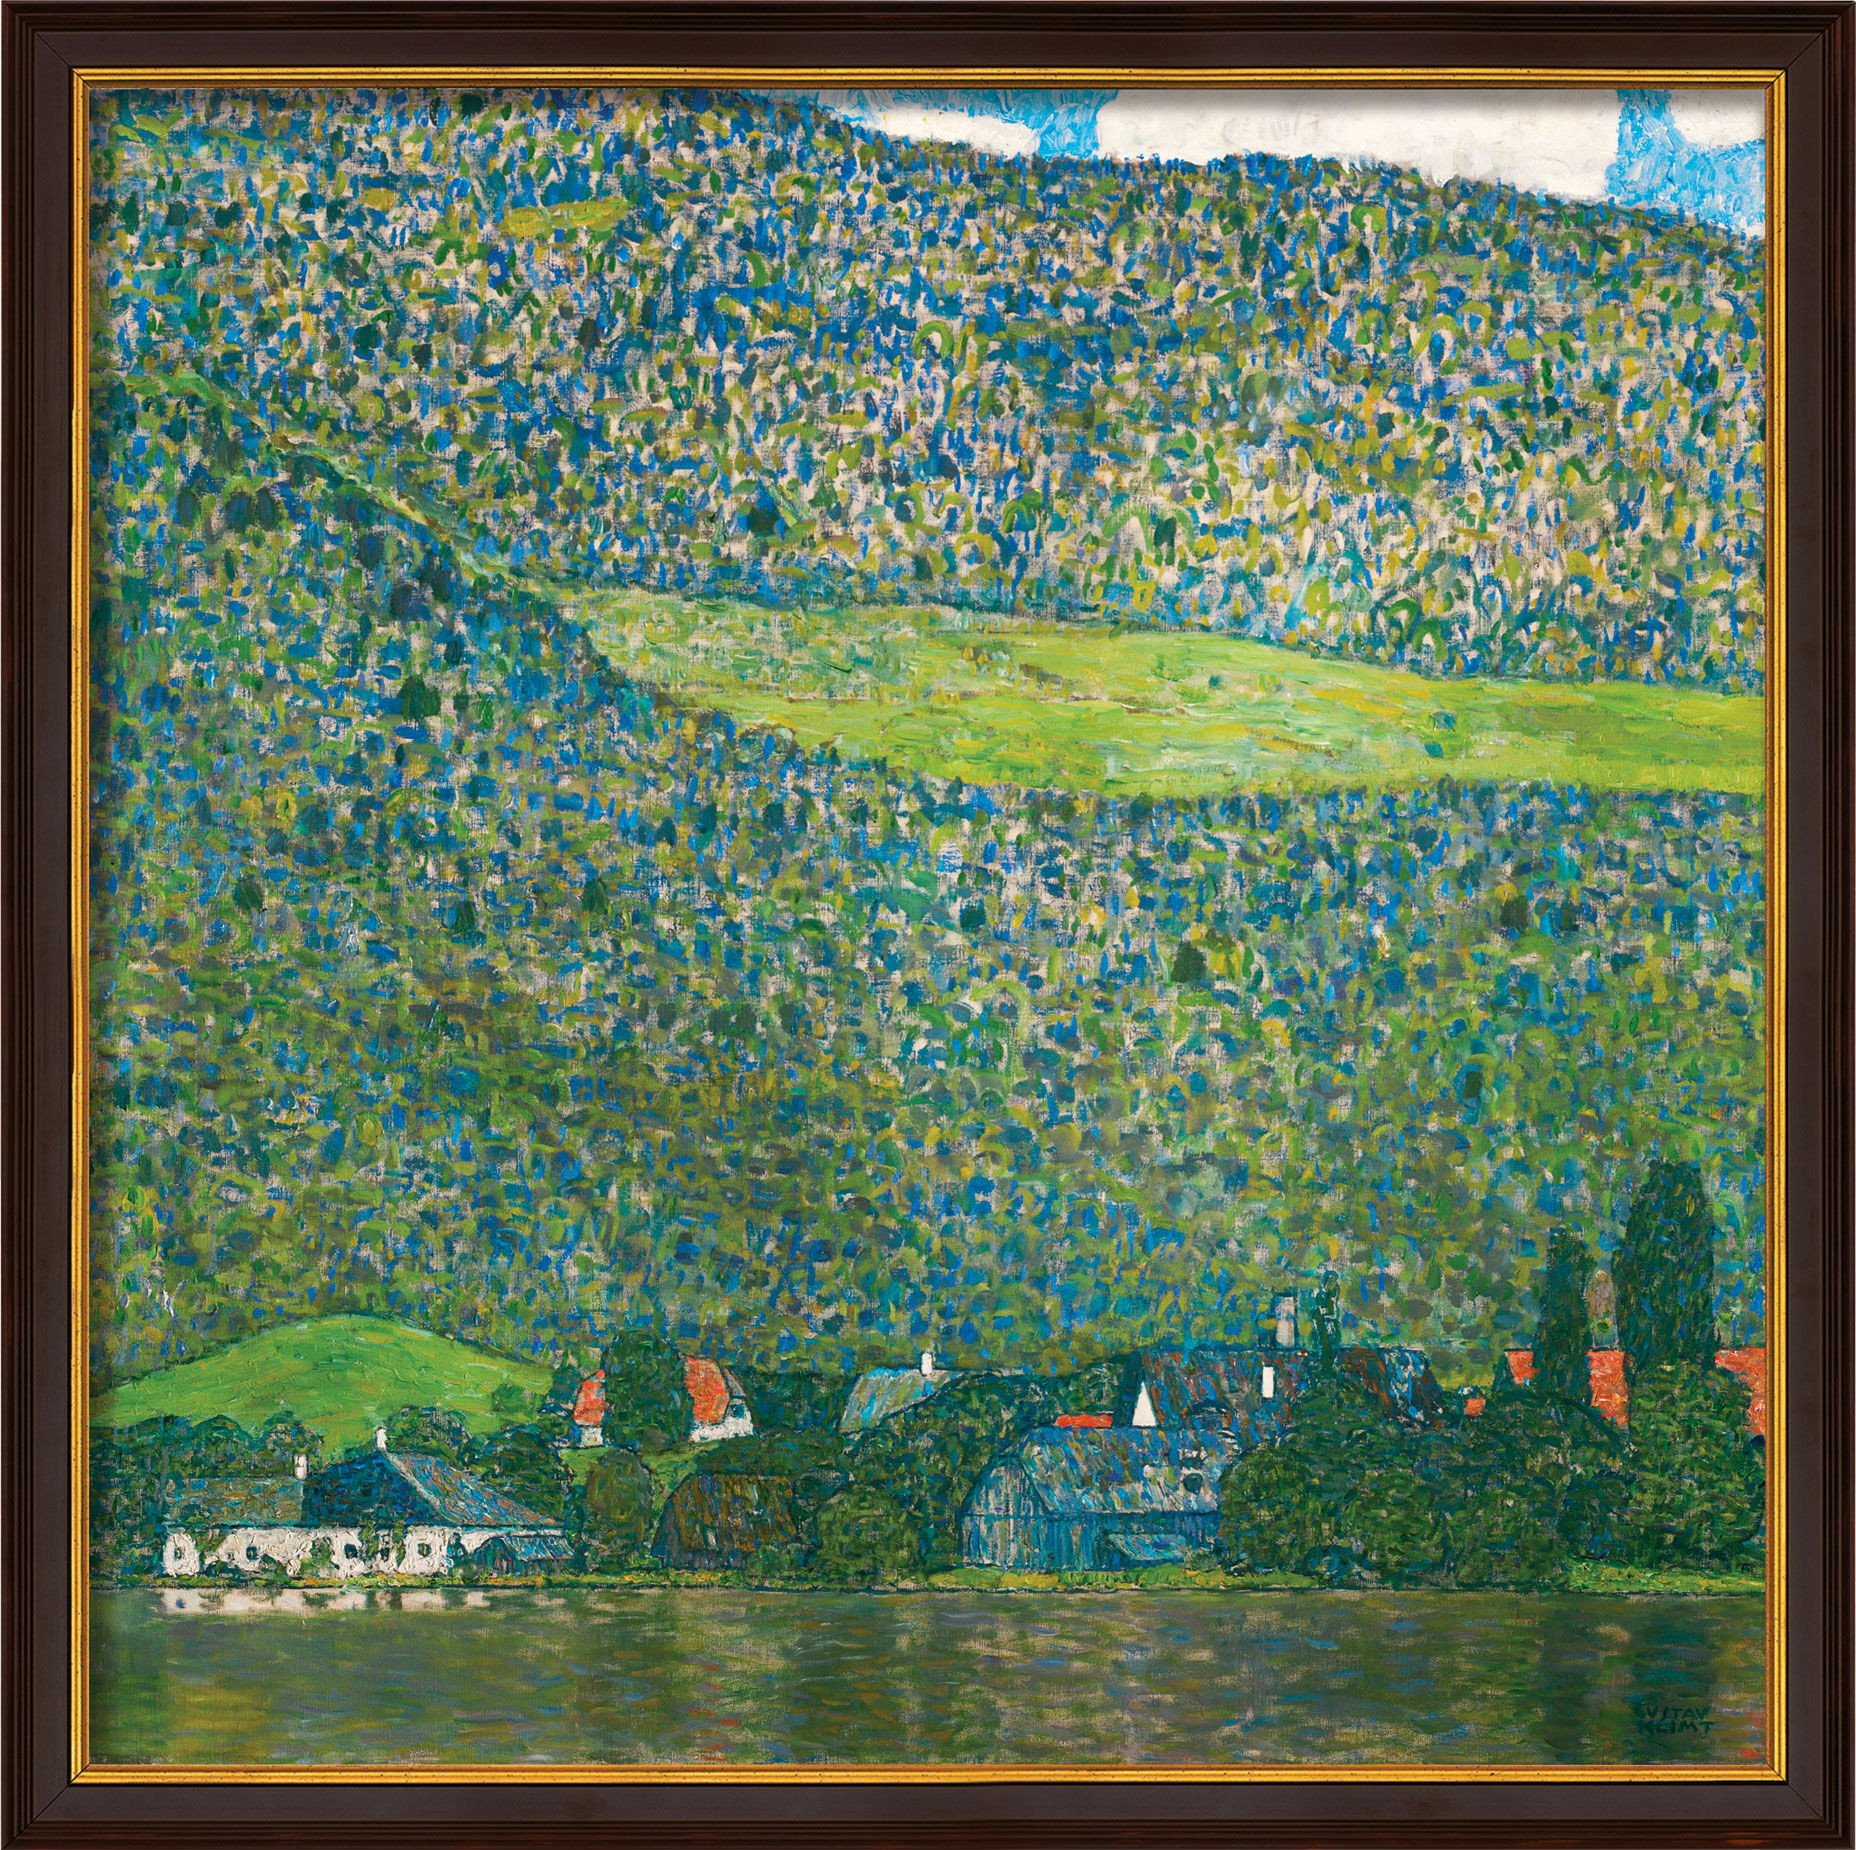 Picture "Litzlberg on the Attersee" (1915), framed by Gustav Klimt